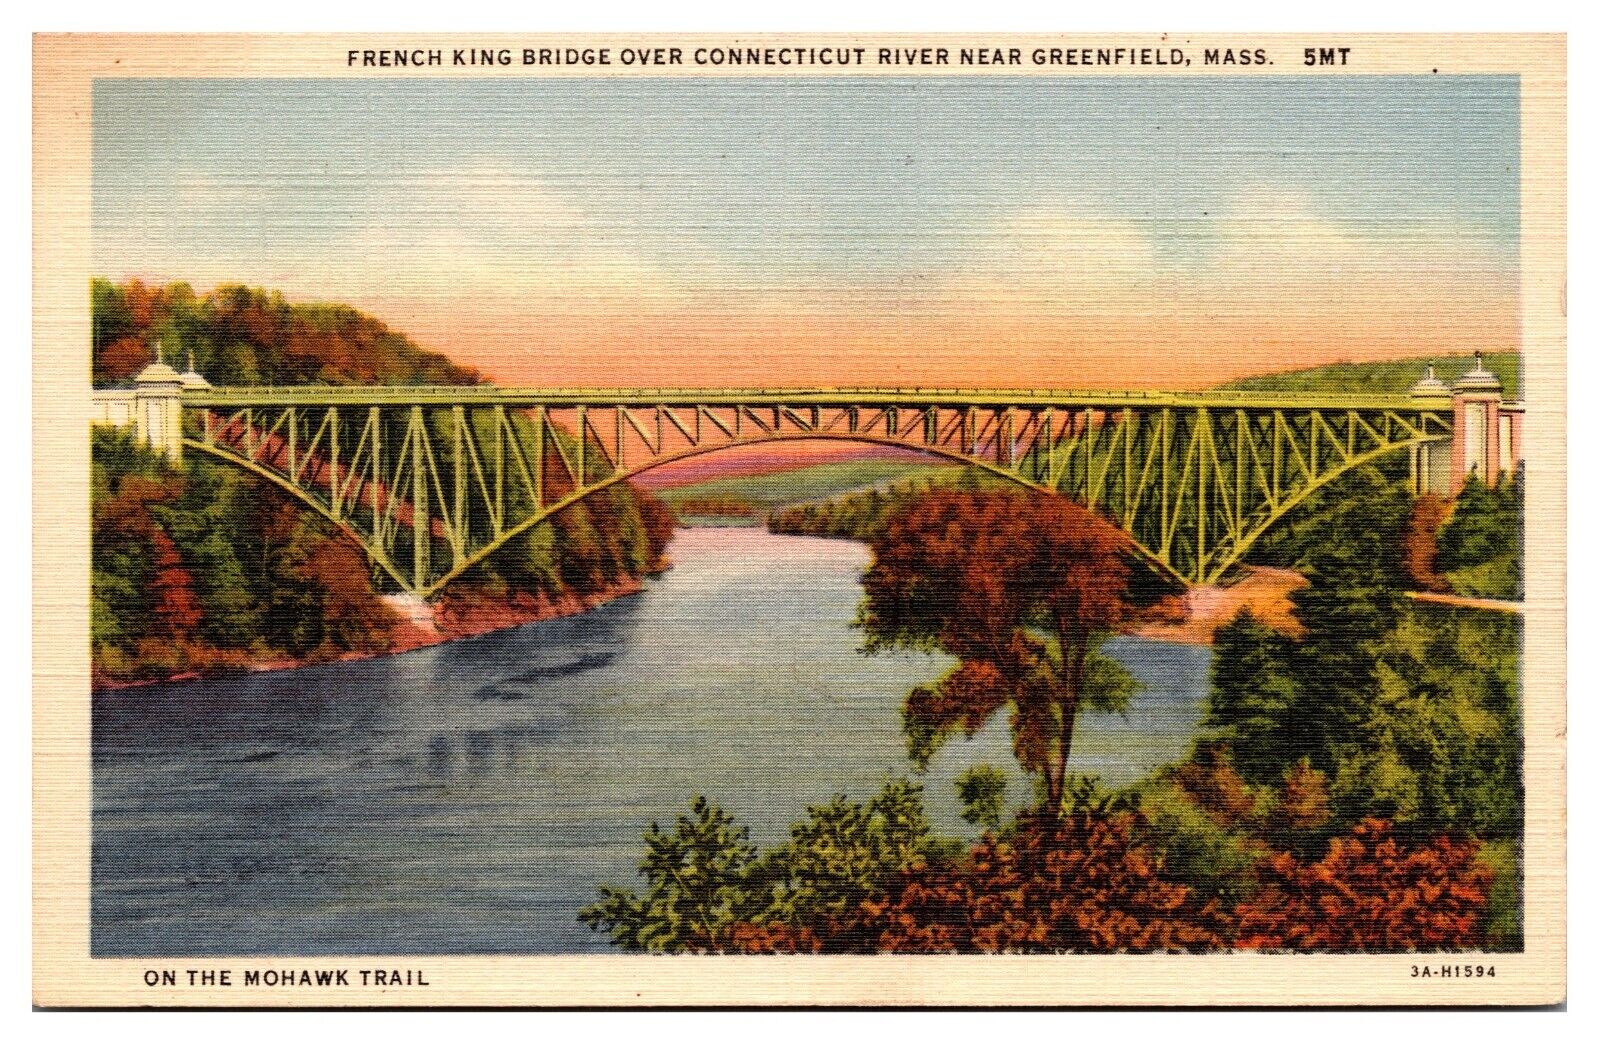 VTG French King Bridge over Connecticut River, Mohawk Trail, Greenfield, MA